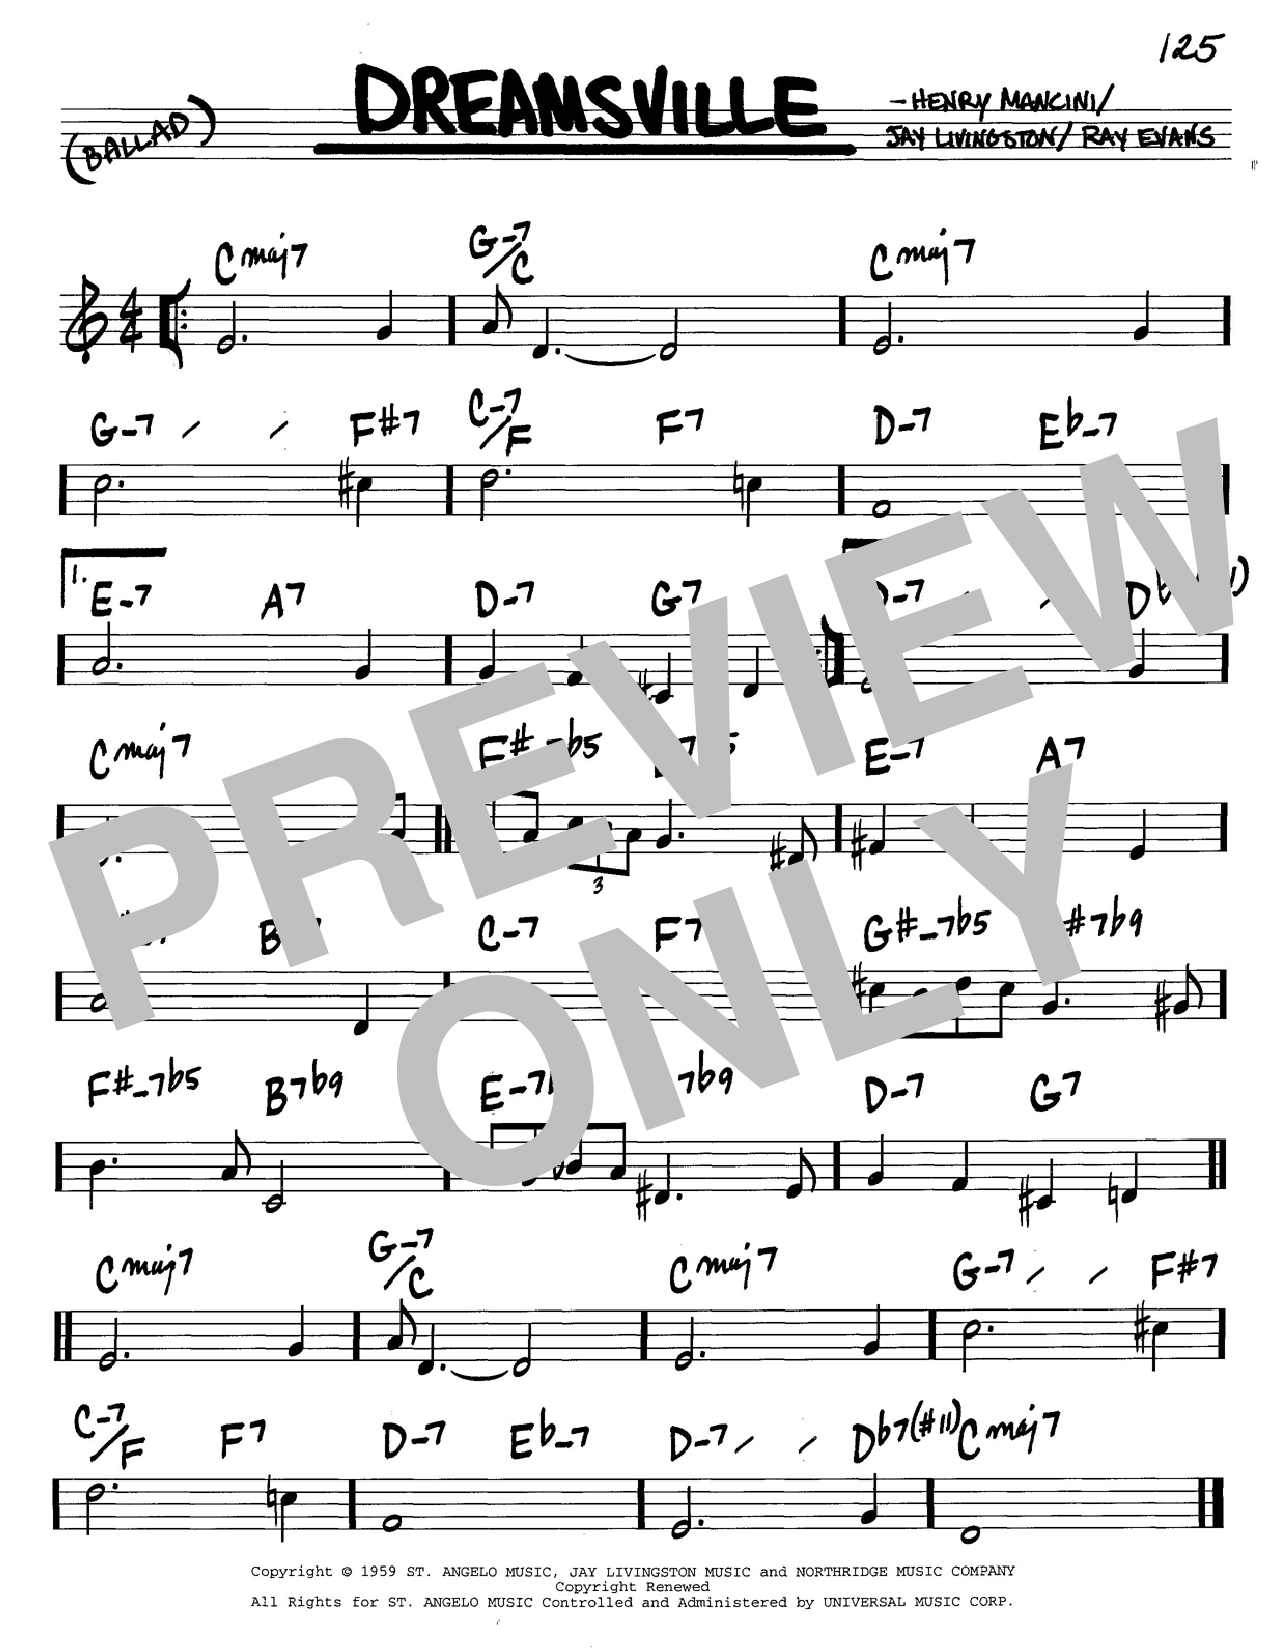 Henry Mancini Dreamsville sheet music preview music notes and score for Guitar Tab including 2 page(s)